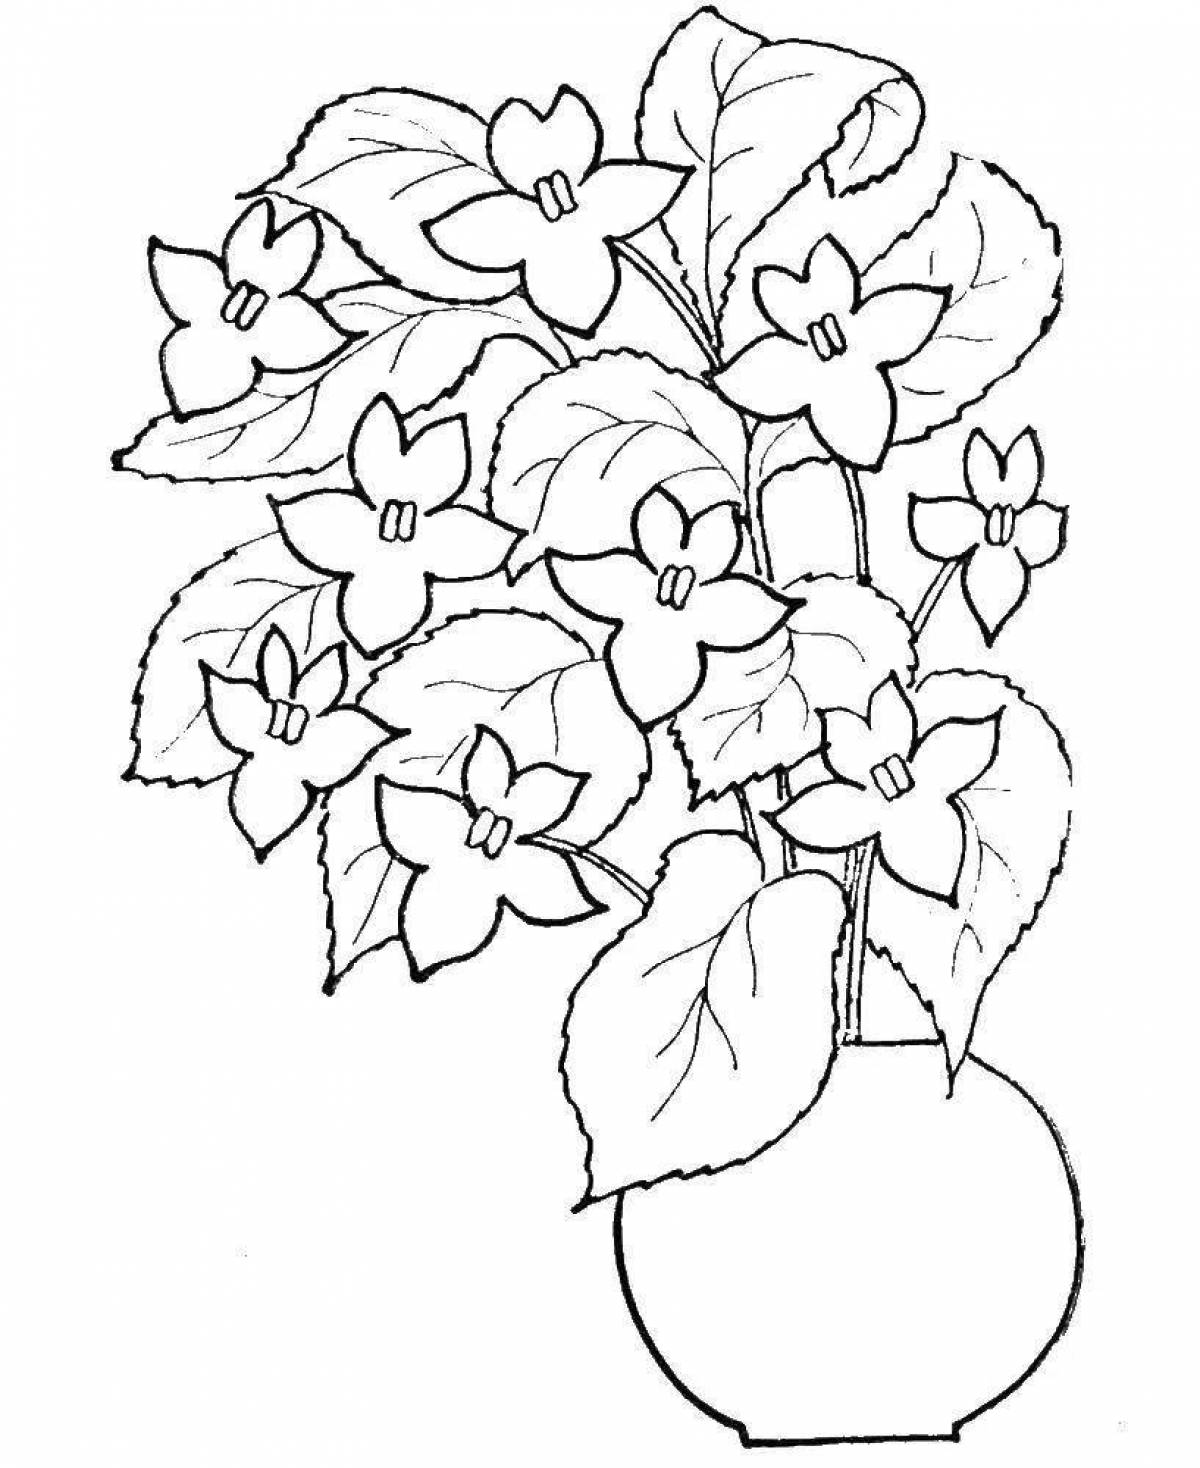 Coloring book luxurious large flowers in a vase